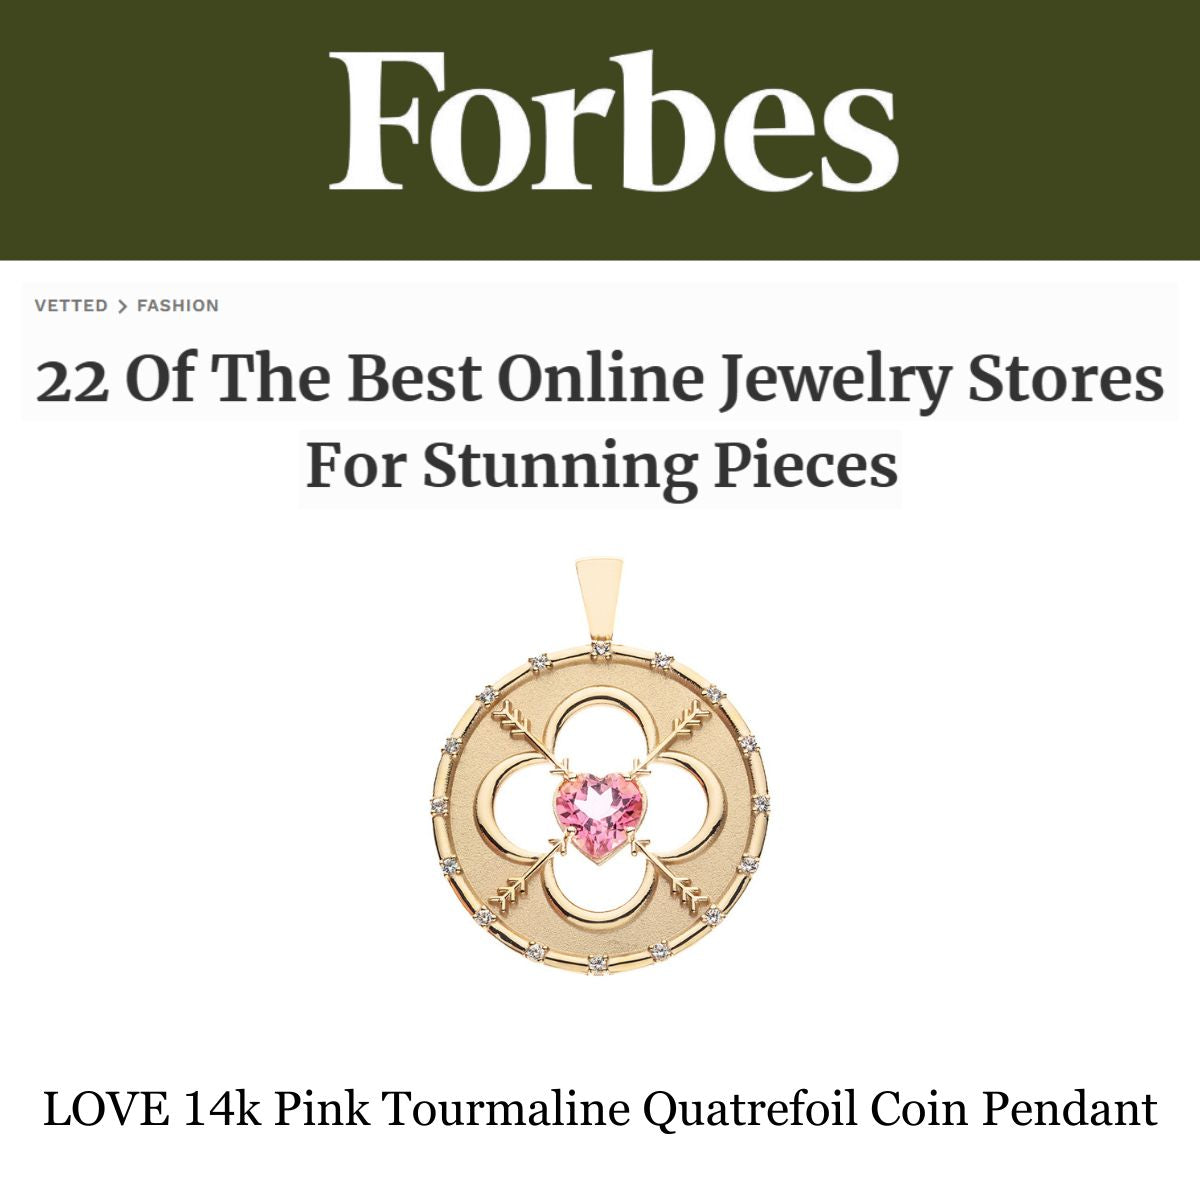 Press Highlight: Forbes "22 Of The Best Online Jewelry Stores For Stunning Pieces"